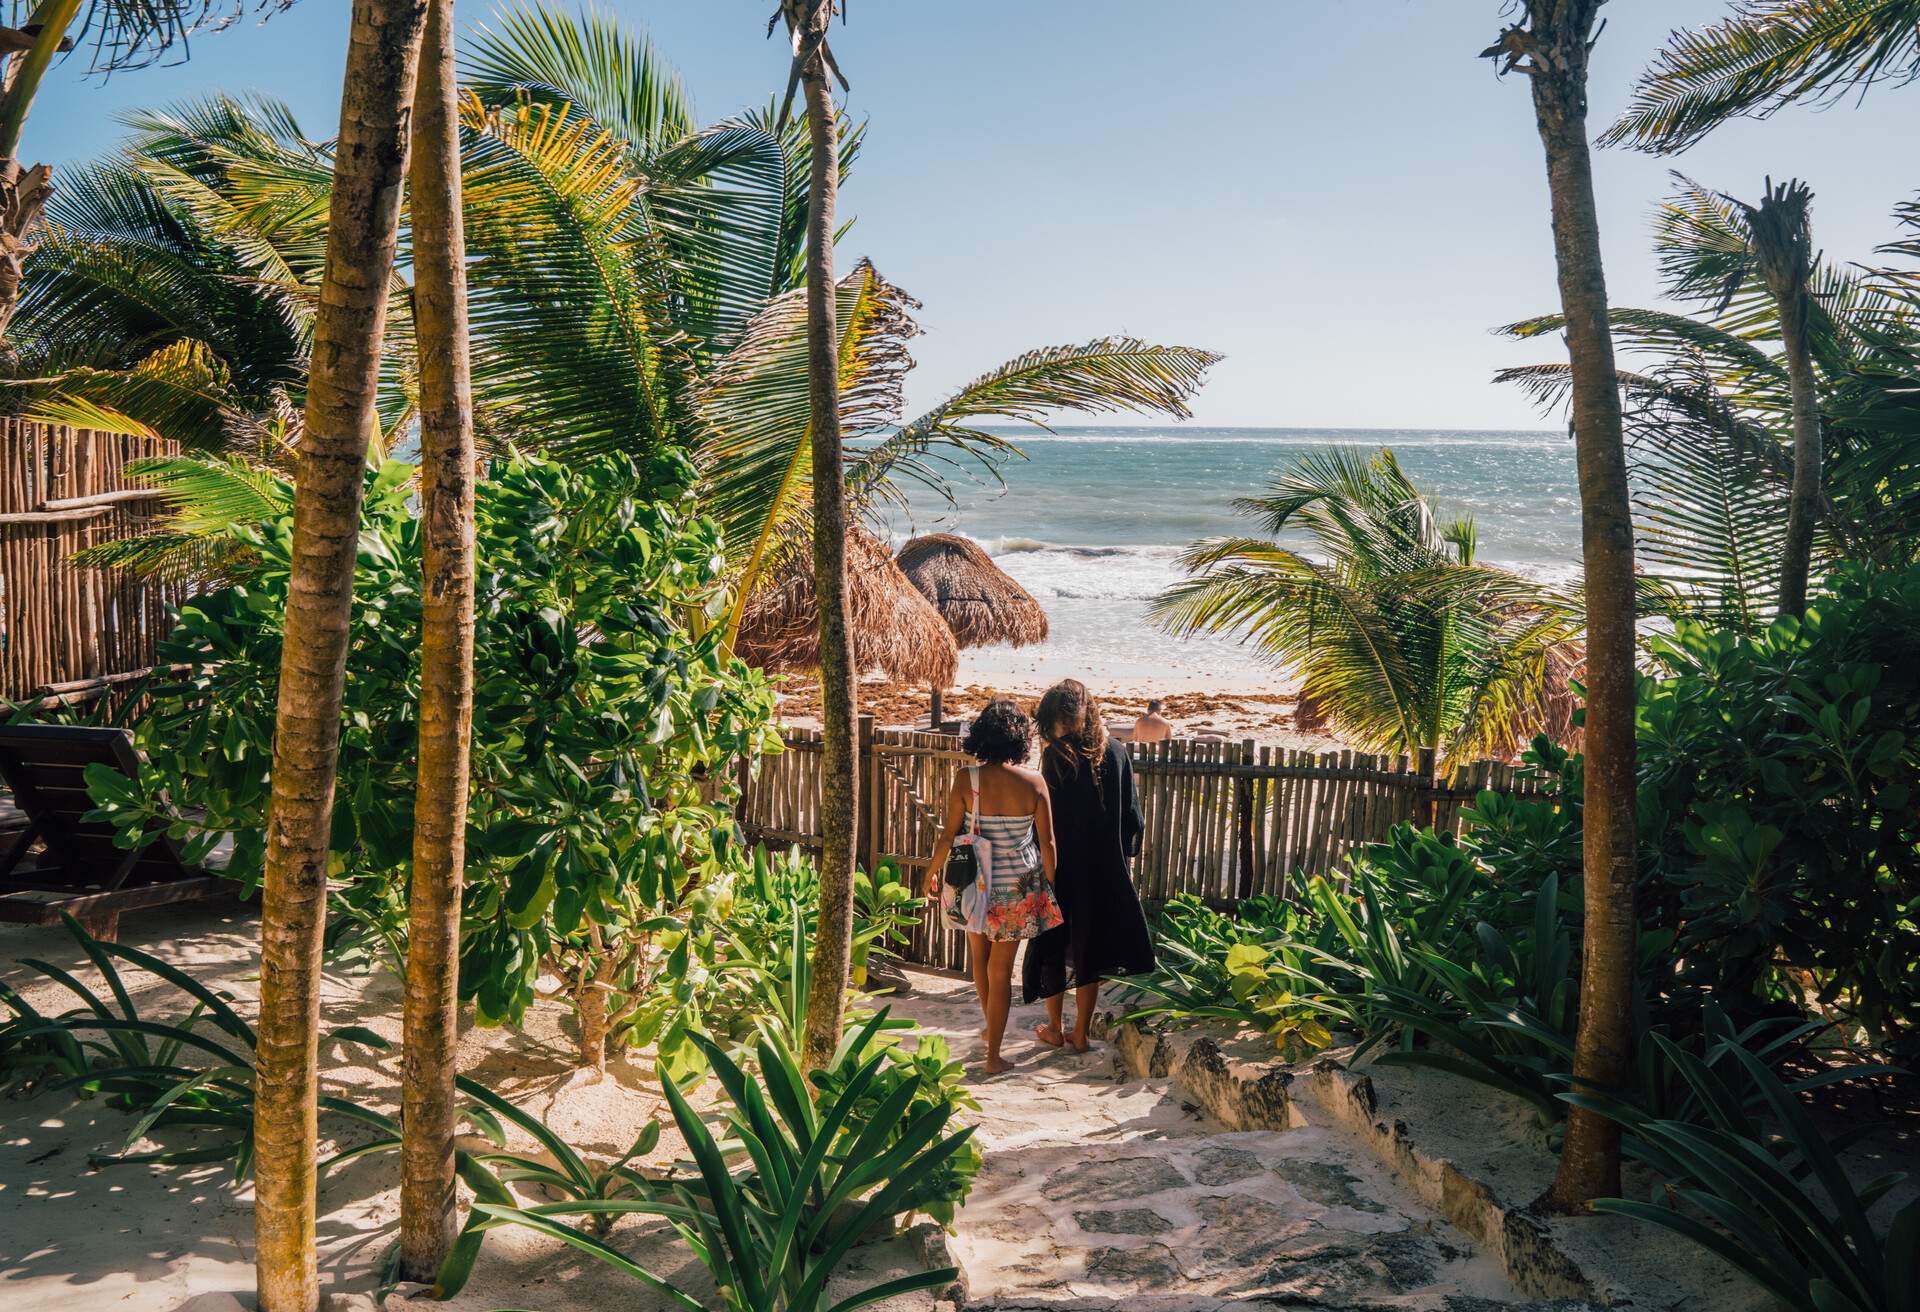 Mexican friends take a trip to Tulum and stay in a resort Boutique Hotel on the Beach. Friends walking on pathway of Boutique Hotel gardens. 